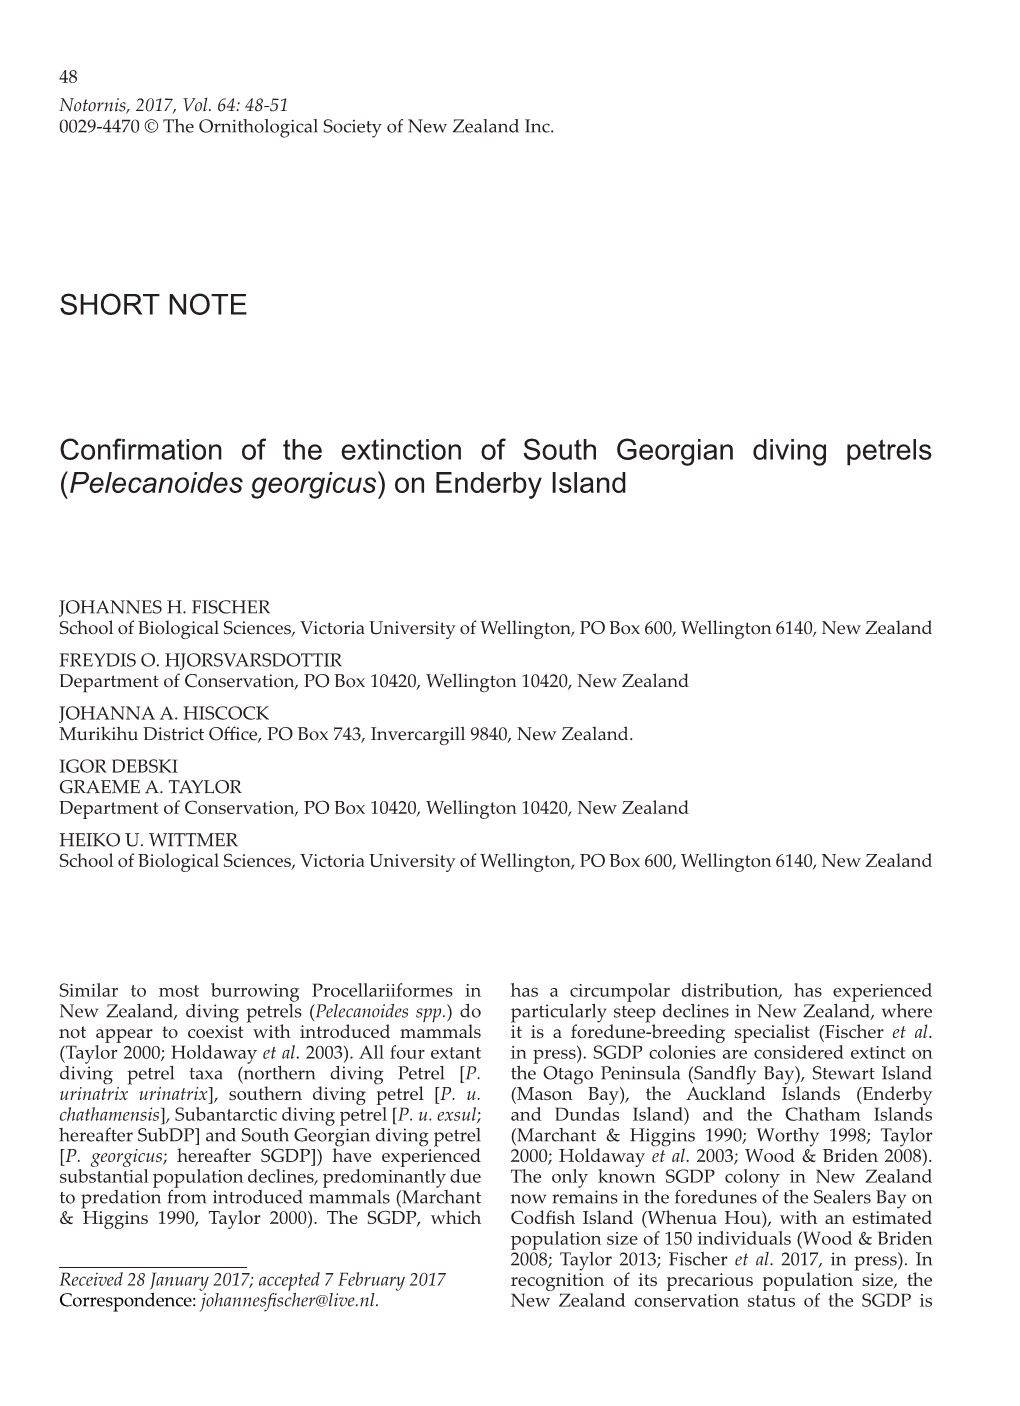 Confirmation of the Extinction of South Georgian Diving Petrels (Pelecanoides Georgicus) on Enderby Island